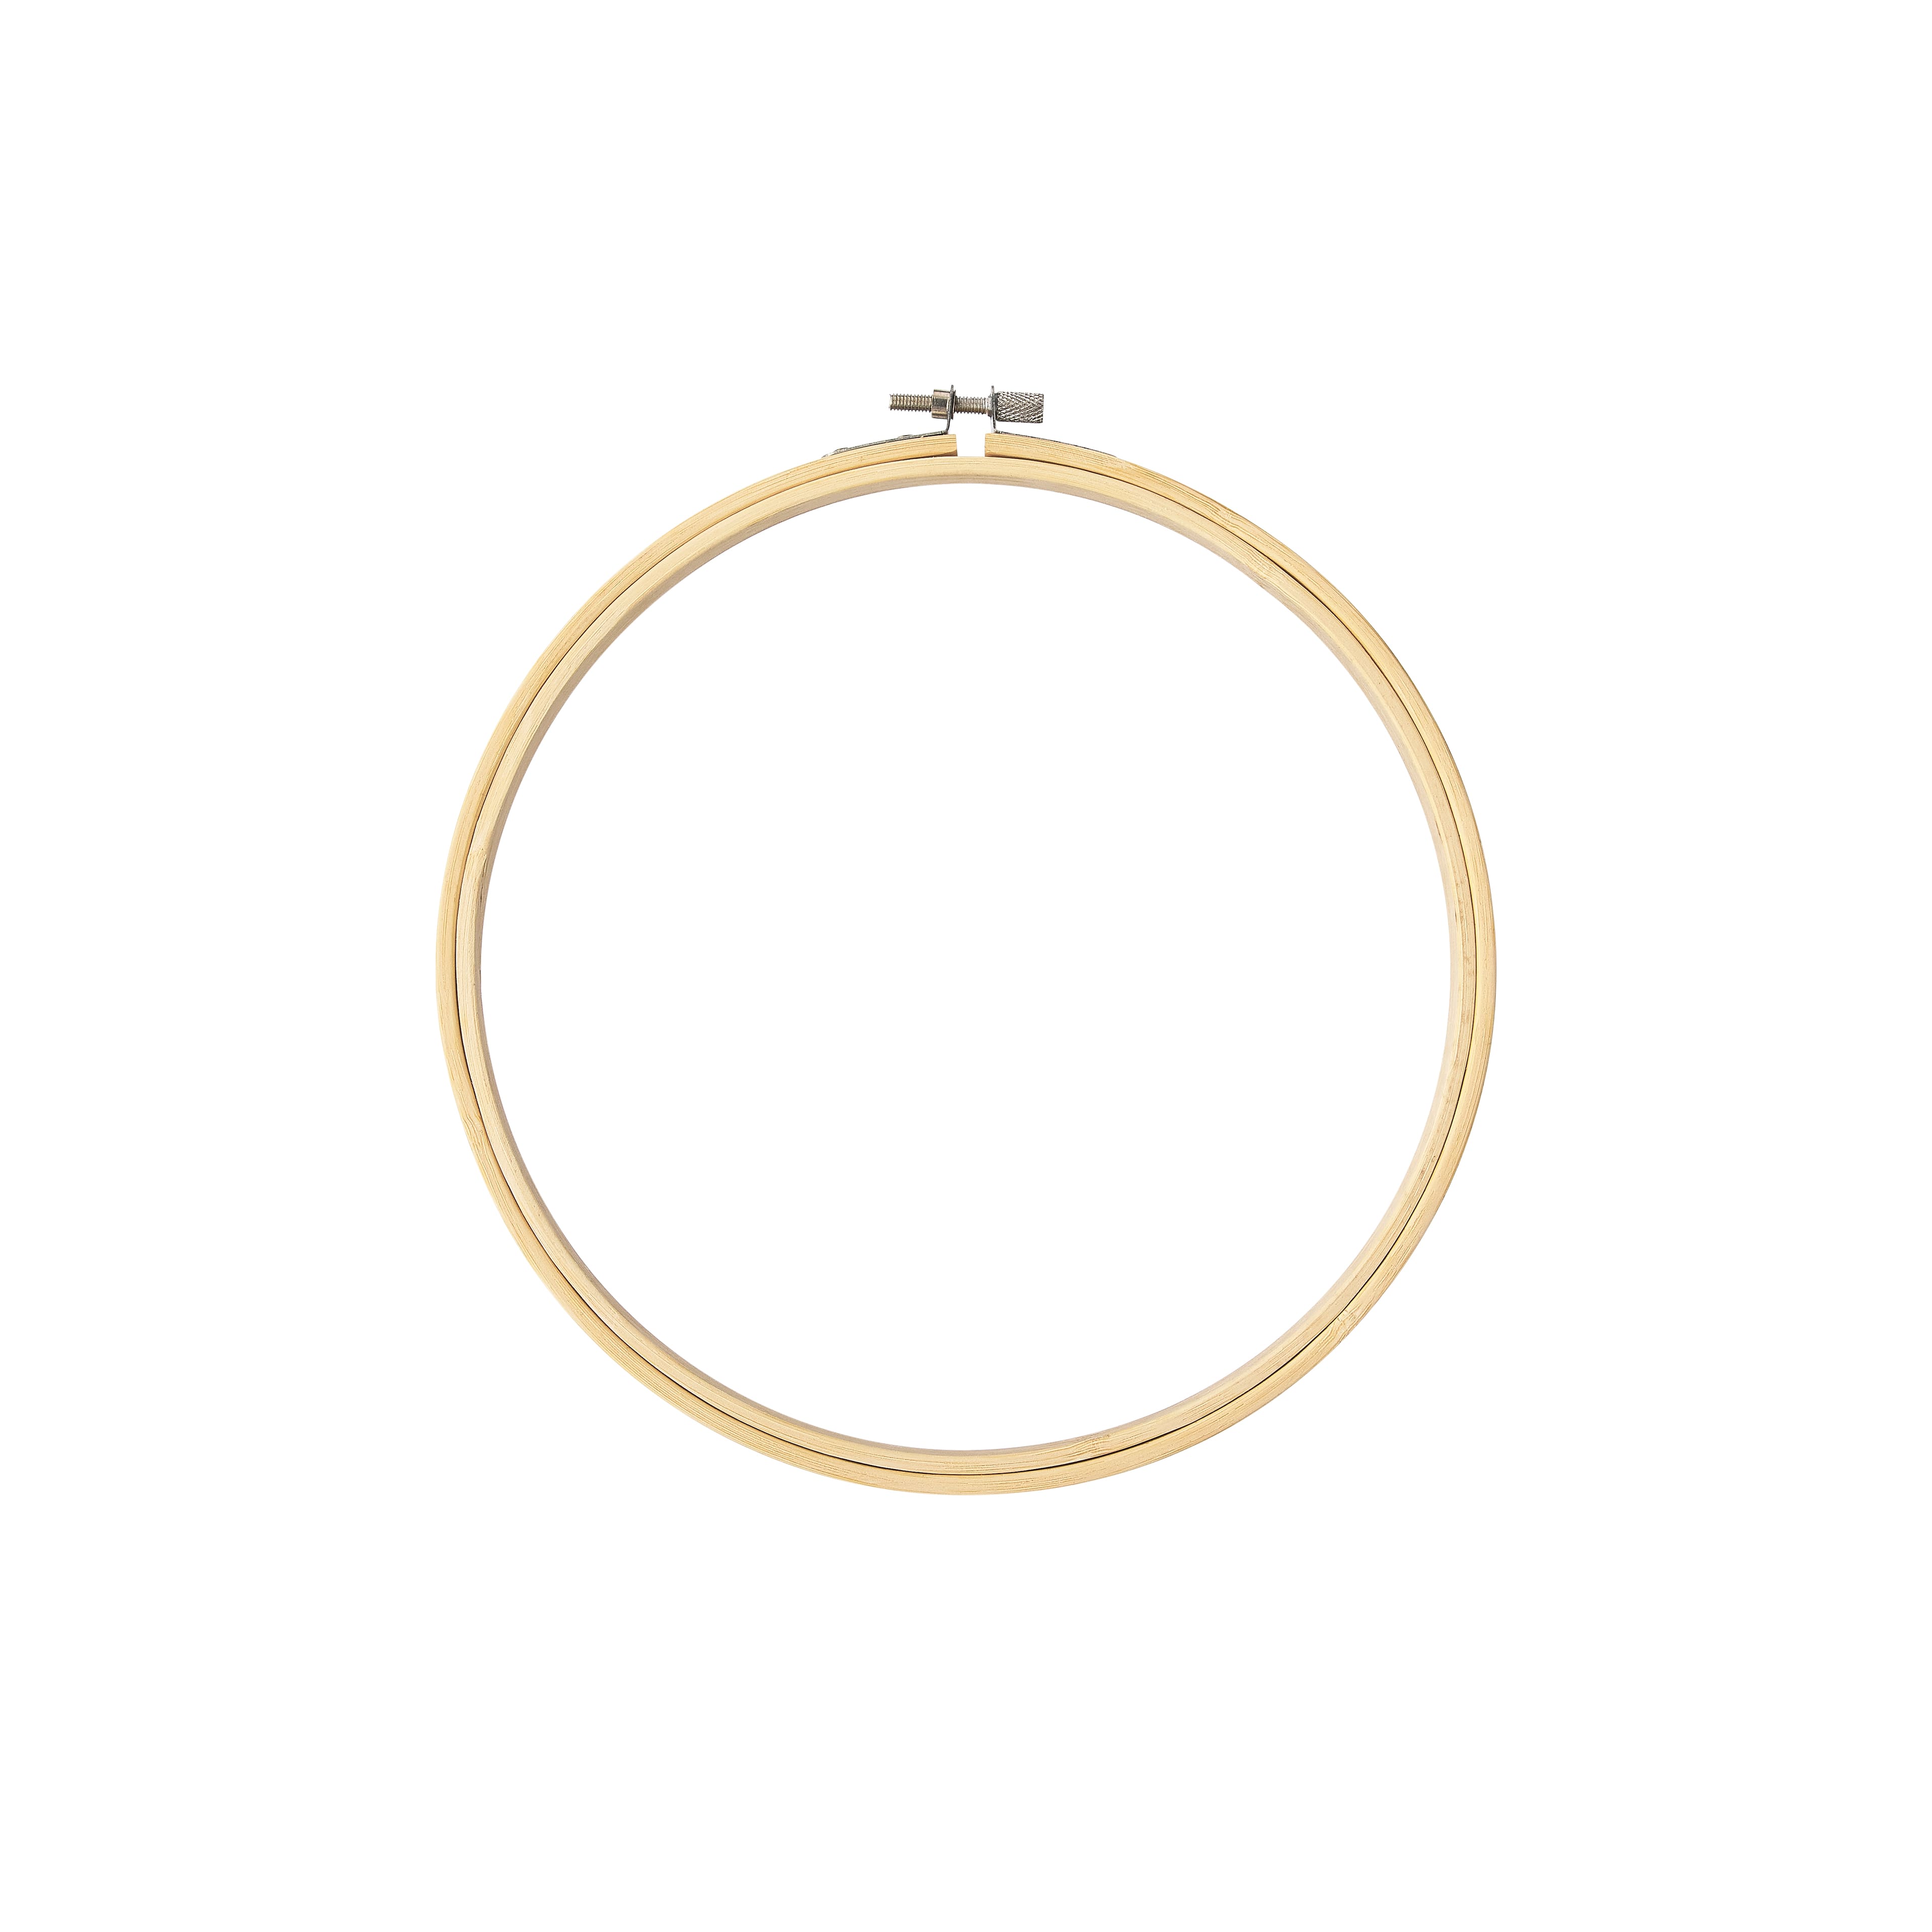 10pcs Bamboo Embroidery Hoops Round Cross Stitch Hoops/Decorative Hoop Ring  (8cm/10cm/15cm/20cm)